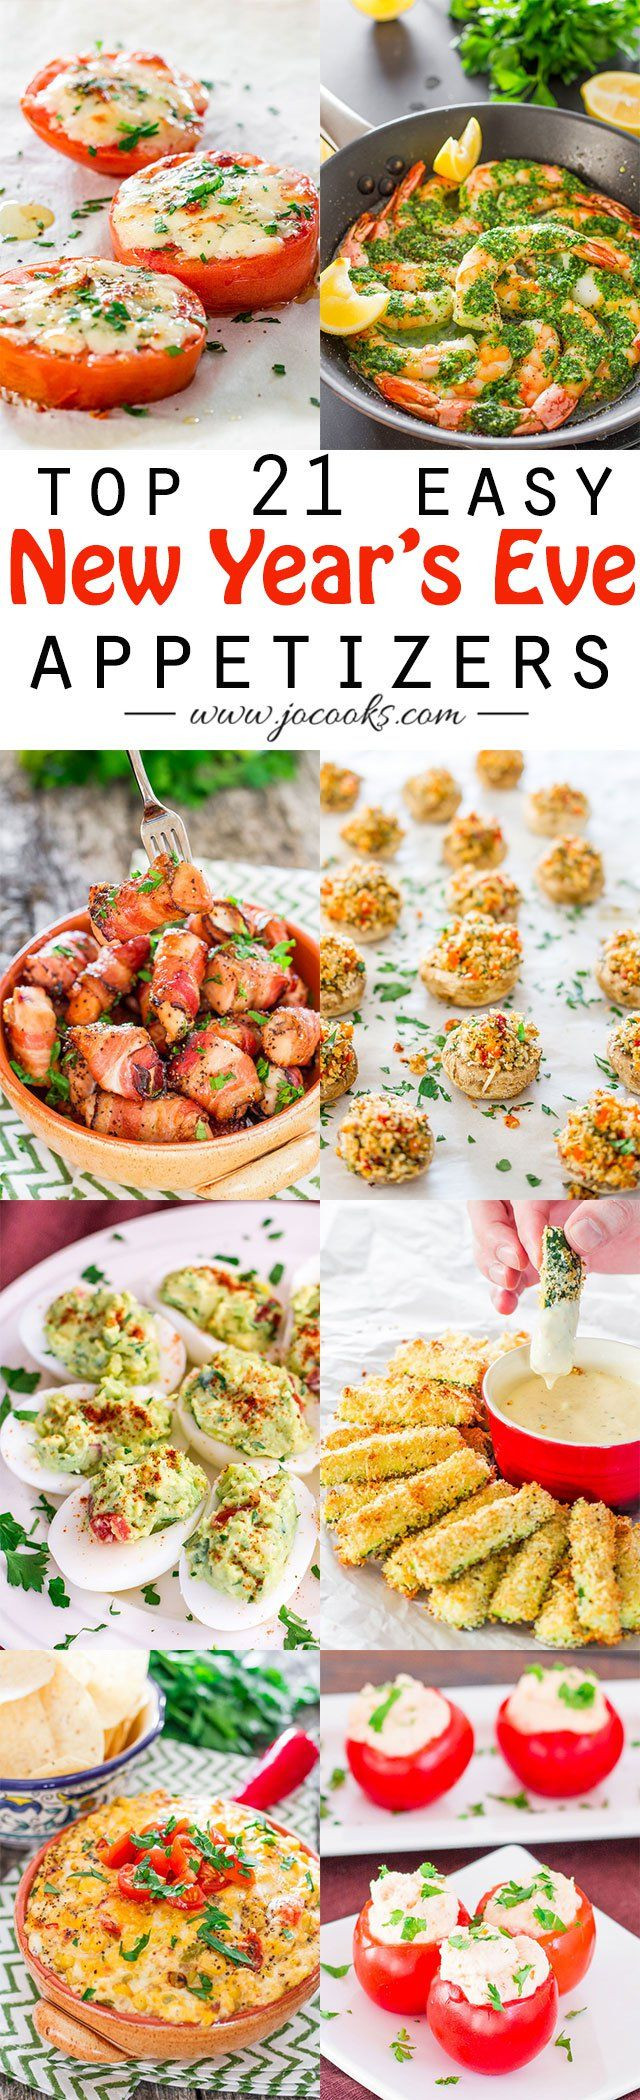 Appetizers For Christmas Eve Party
 25 best ideas about New year s eve appetizers on